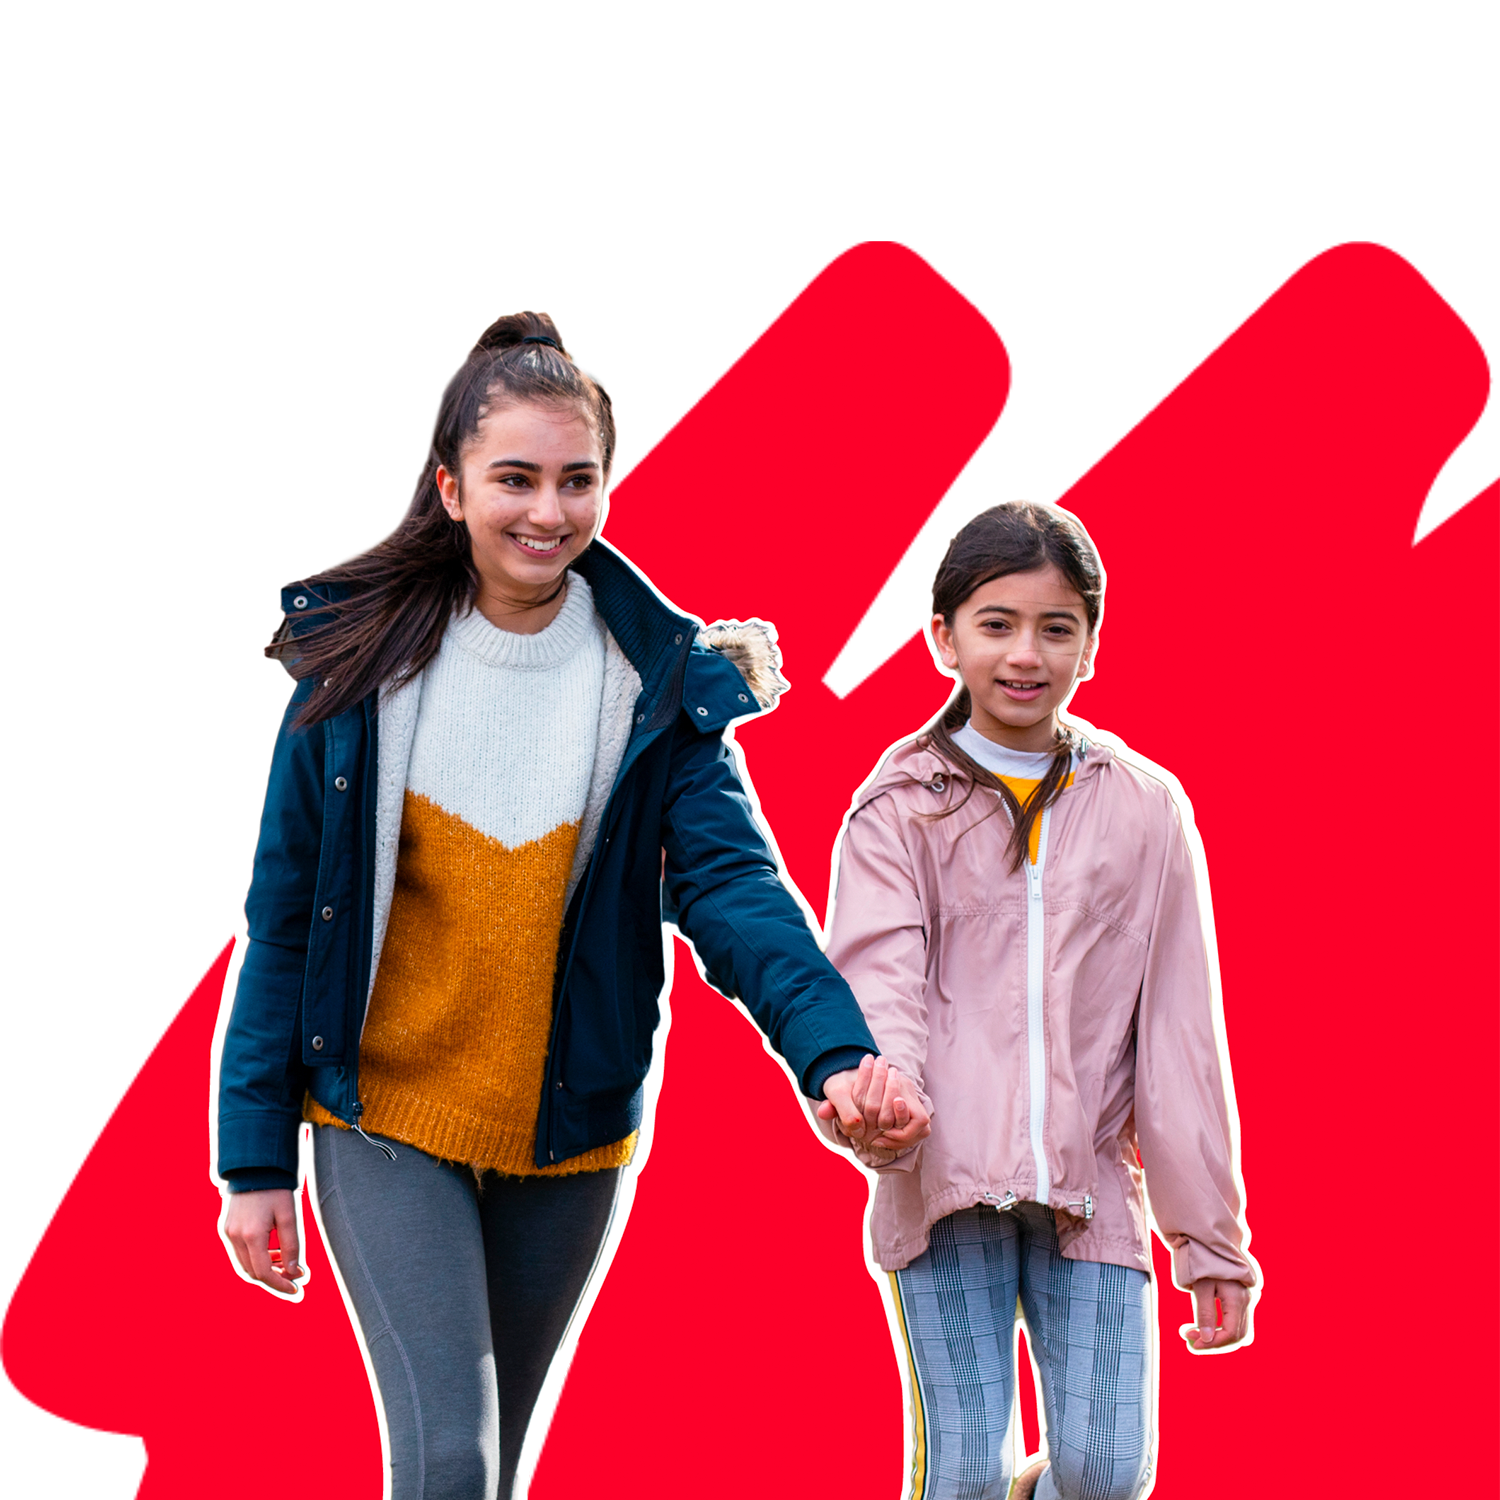 An older girl and younger girl holding hands while walking and smiling